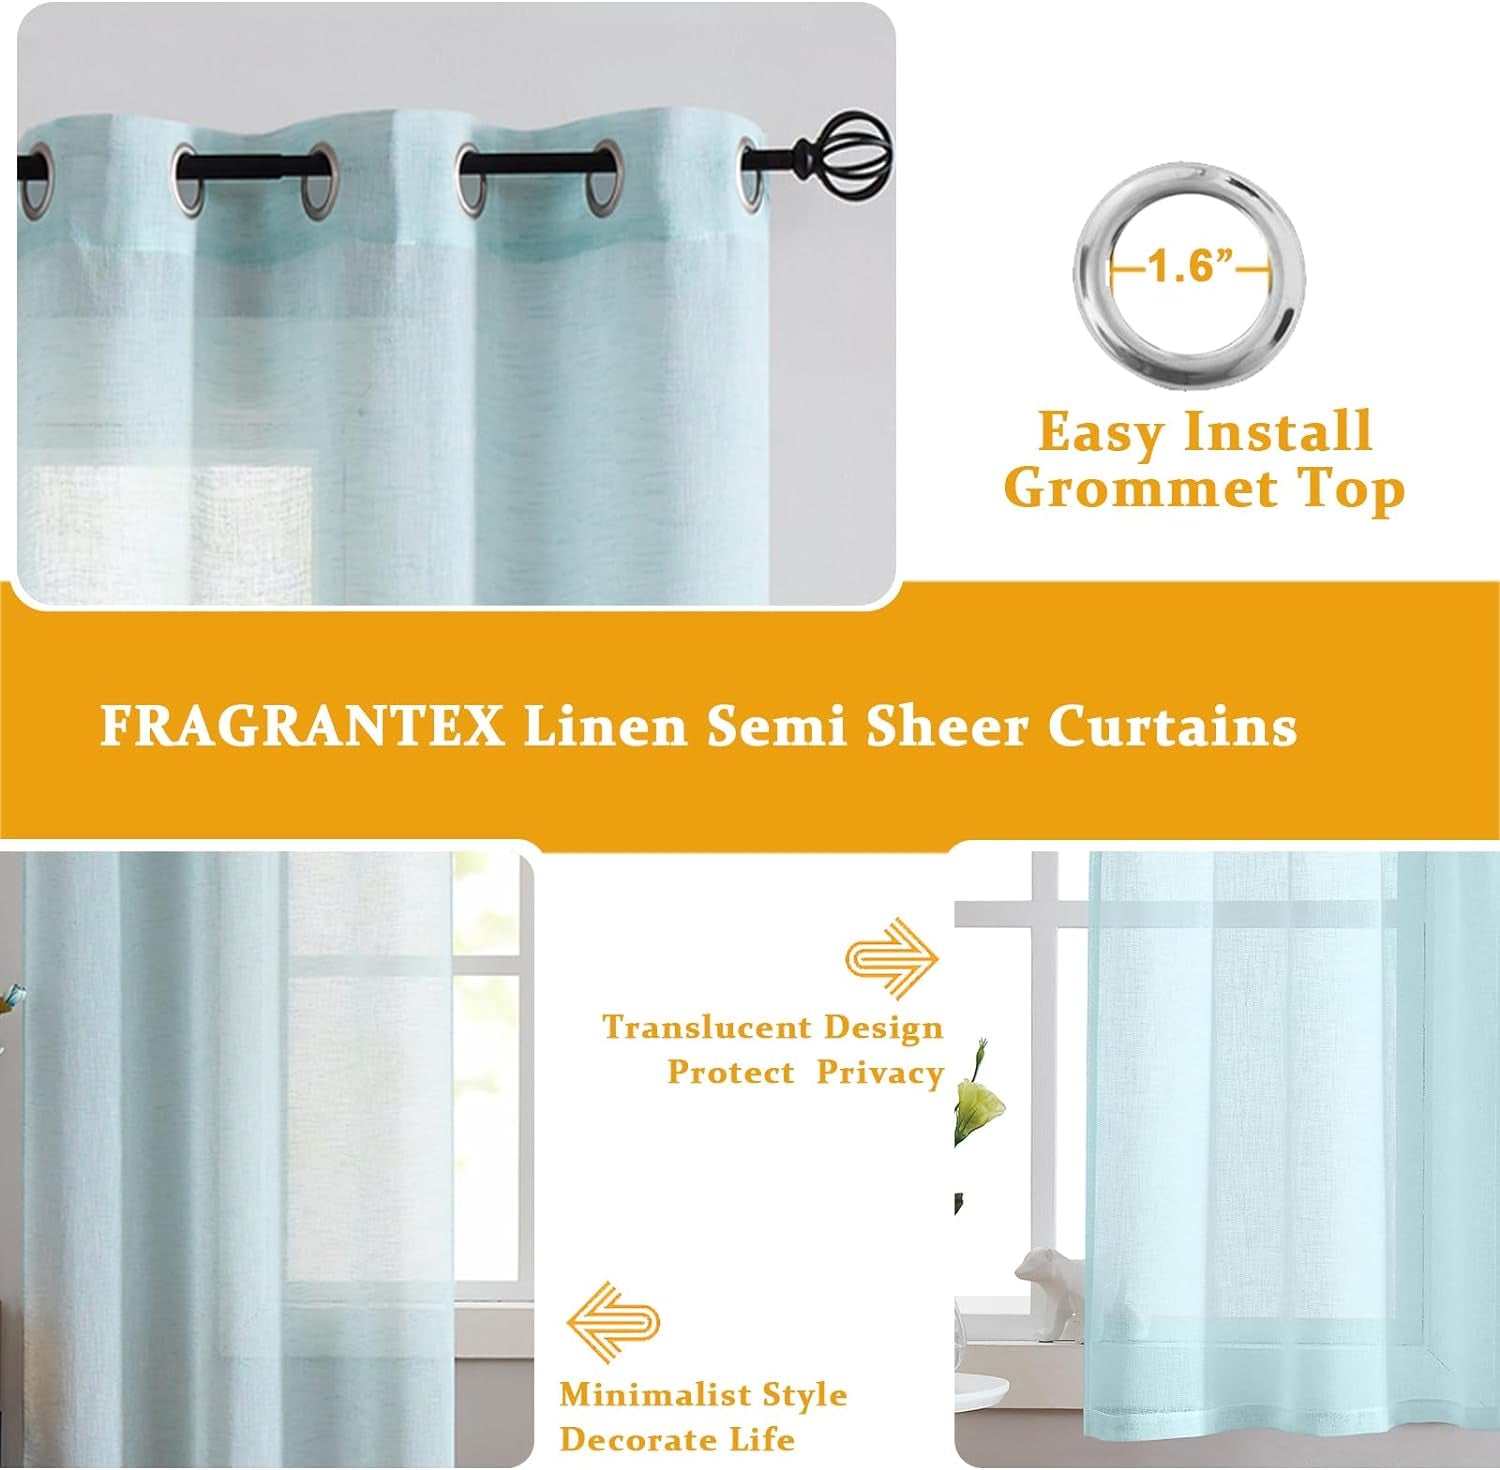 Fragrantex Linen Sheer Turquoise Curtains Panels for Bedroom 84 Inches Aqua Maldives Voile Curtain Drapes for Living Room Window Treatment Sets 2 Panels Grommet Header,40" W X 84" L  Home decor realm   